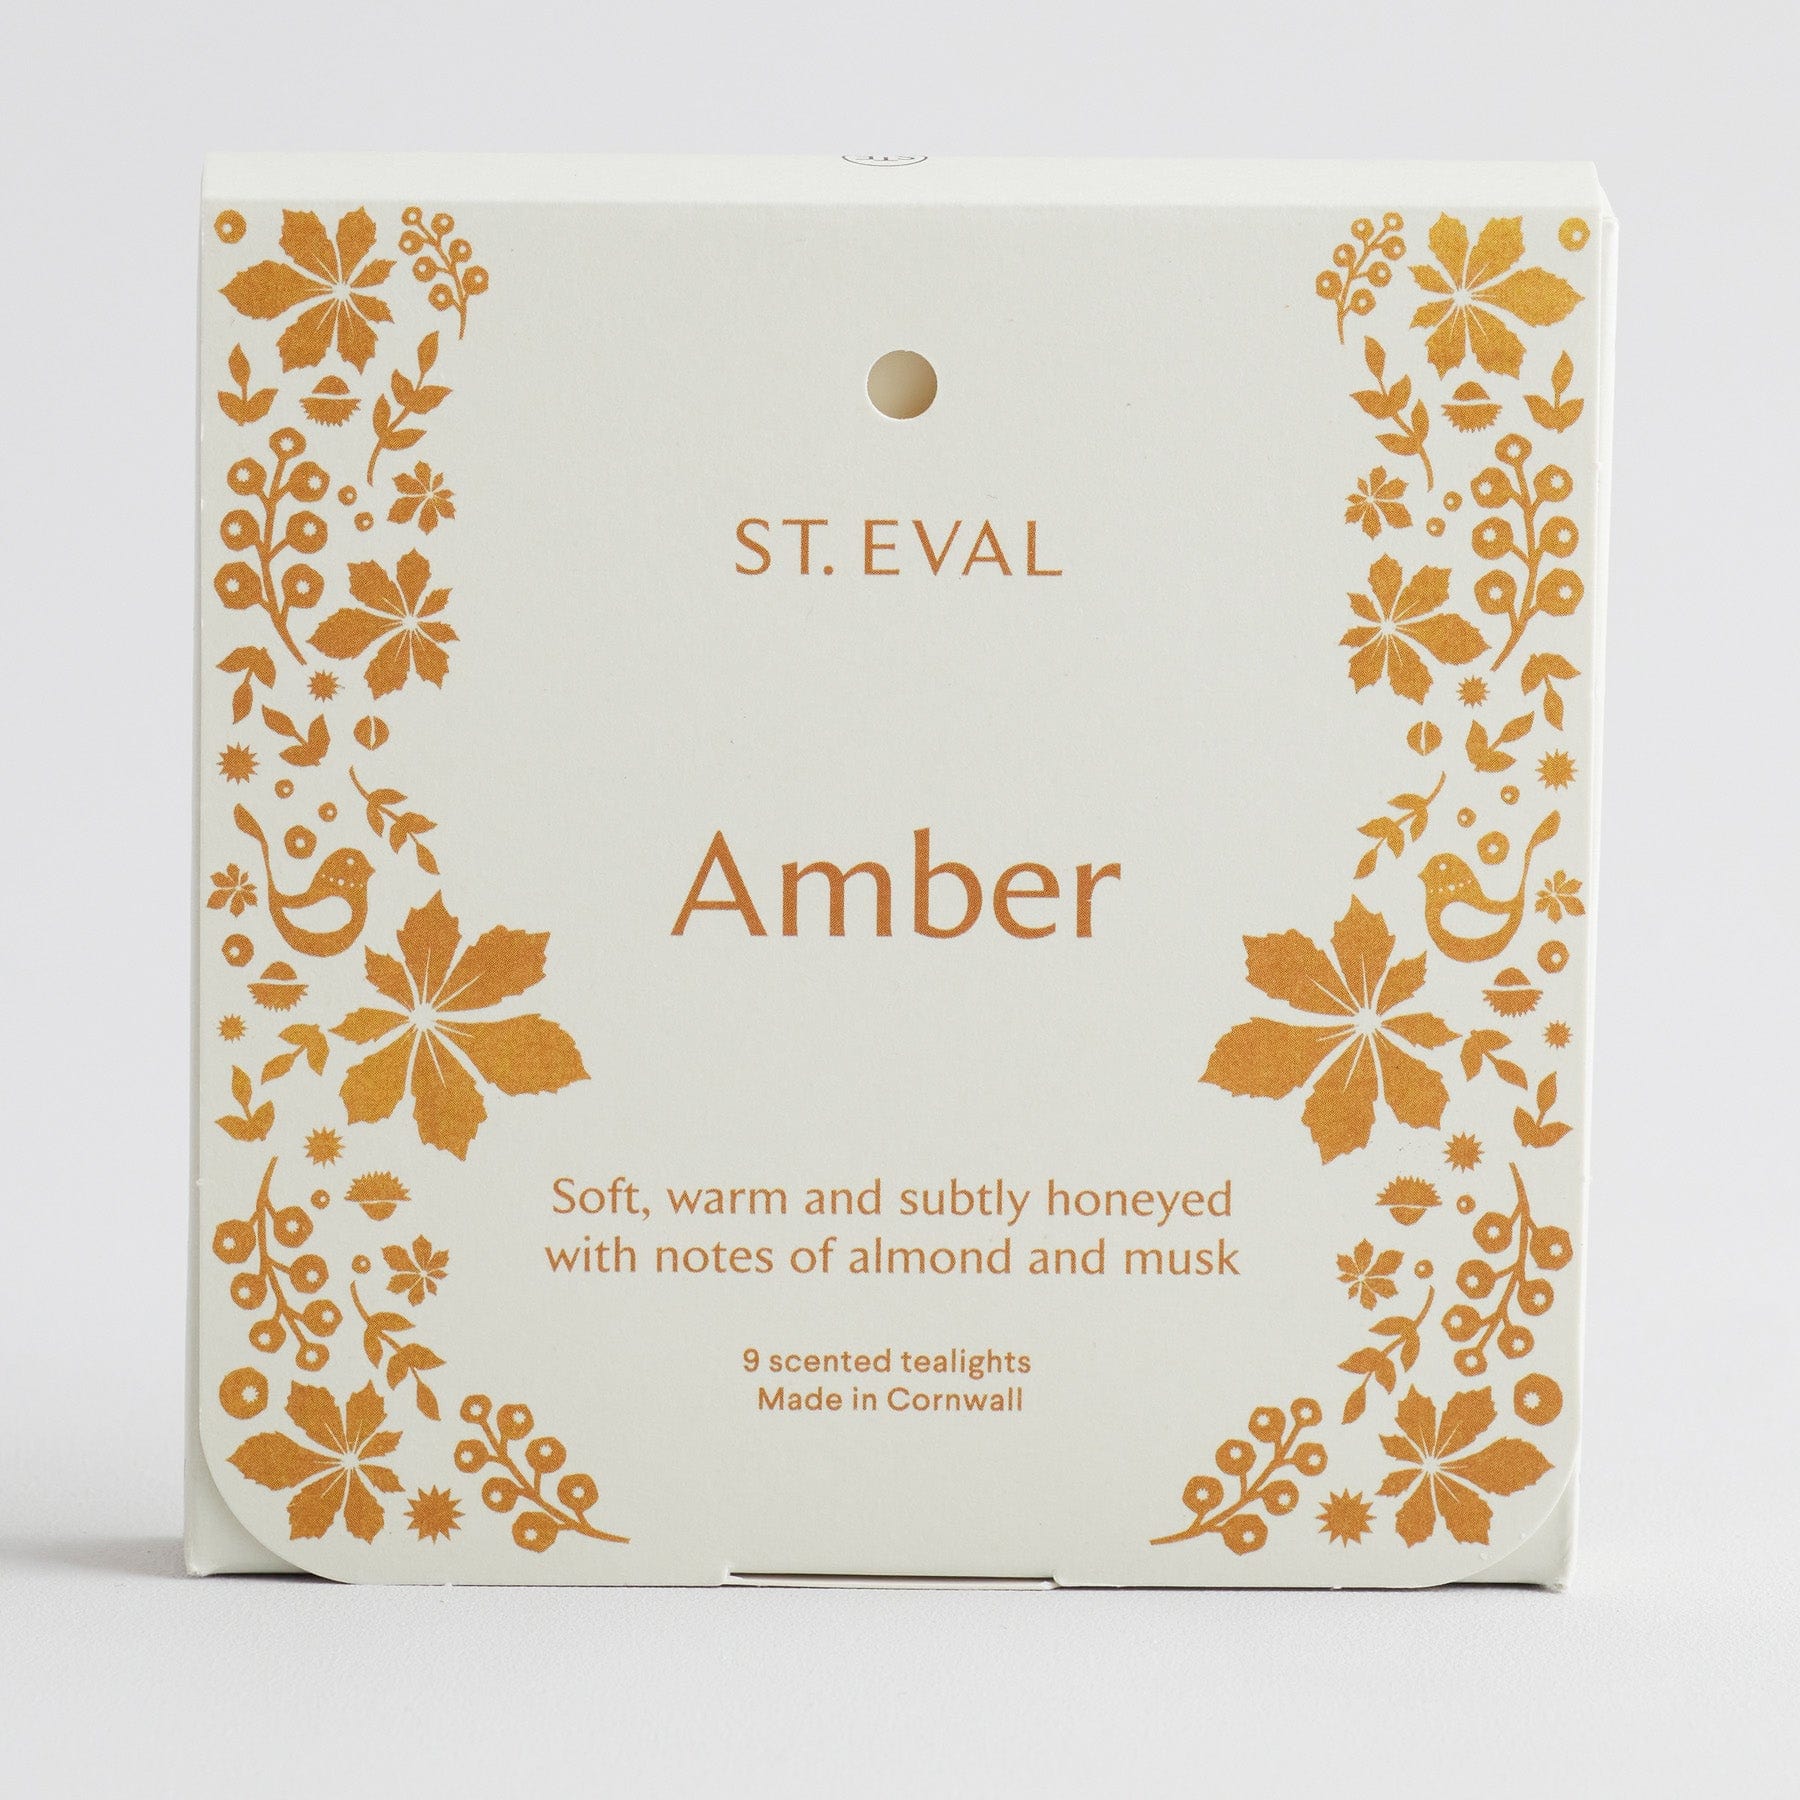 Amber scented tealights